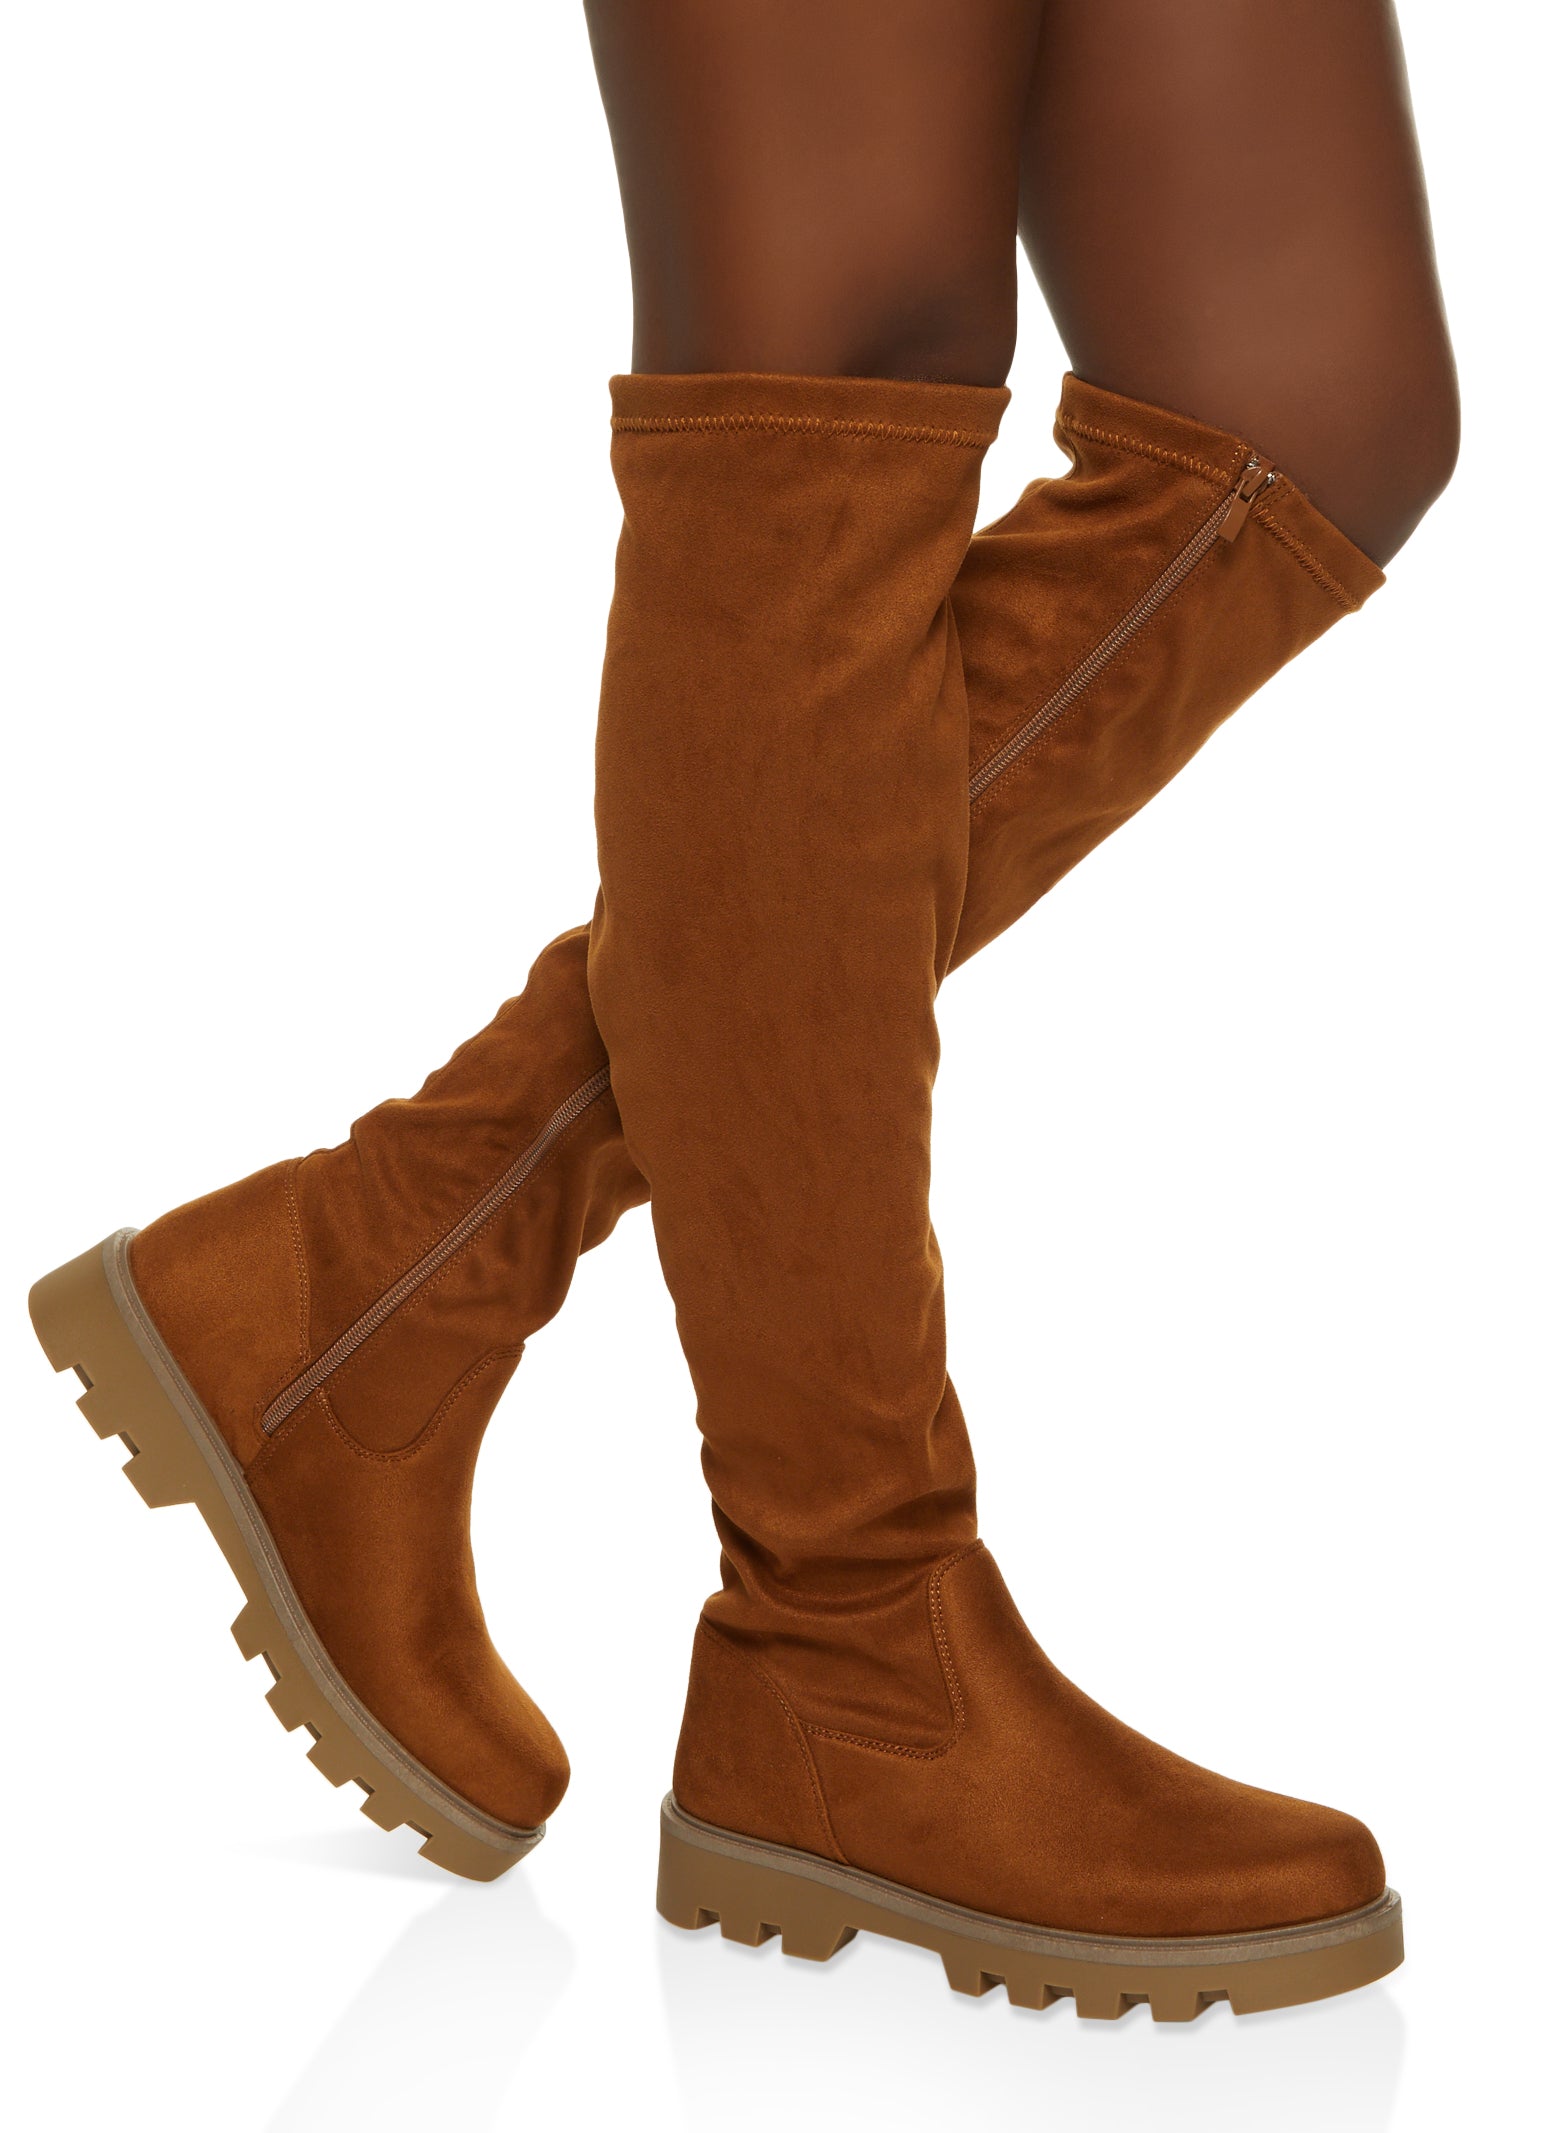 Womens Lug Sole Knee High Boots, Brown, Size 11